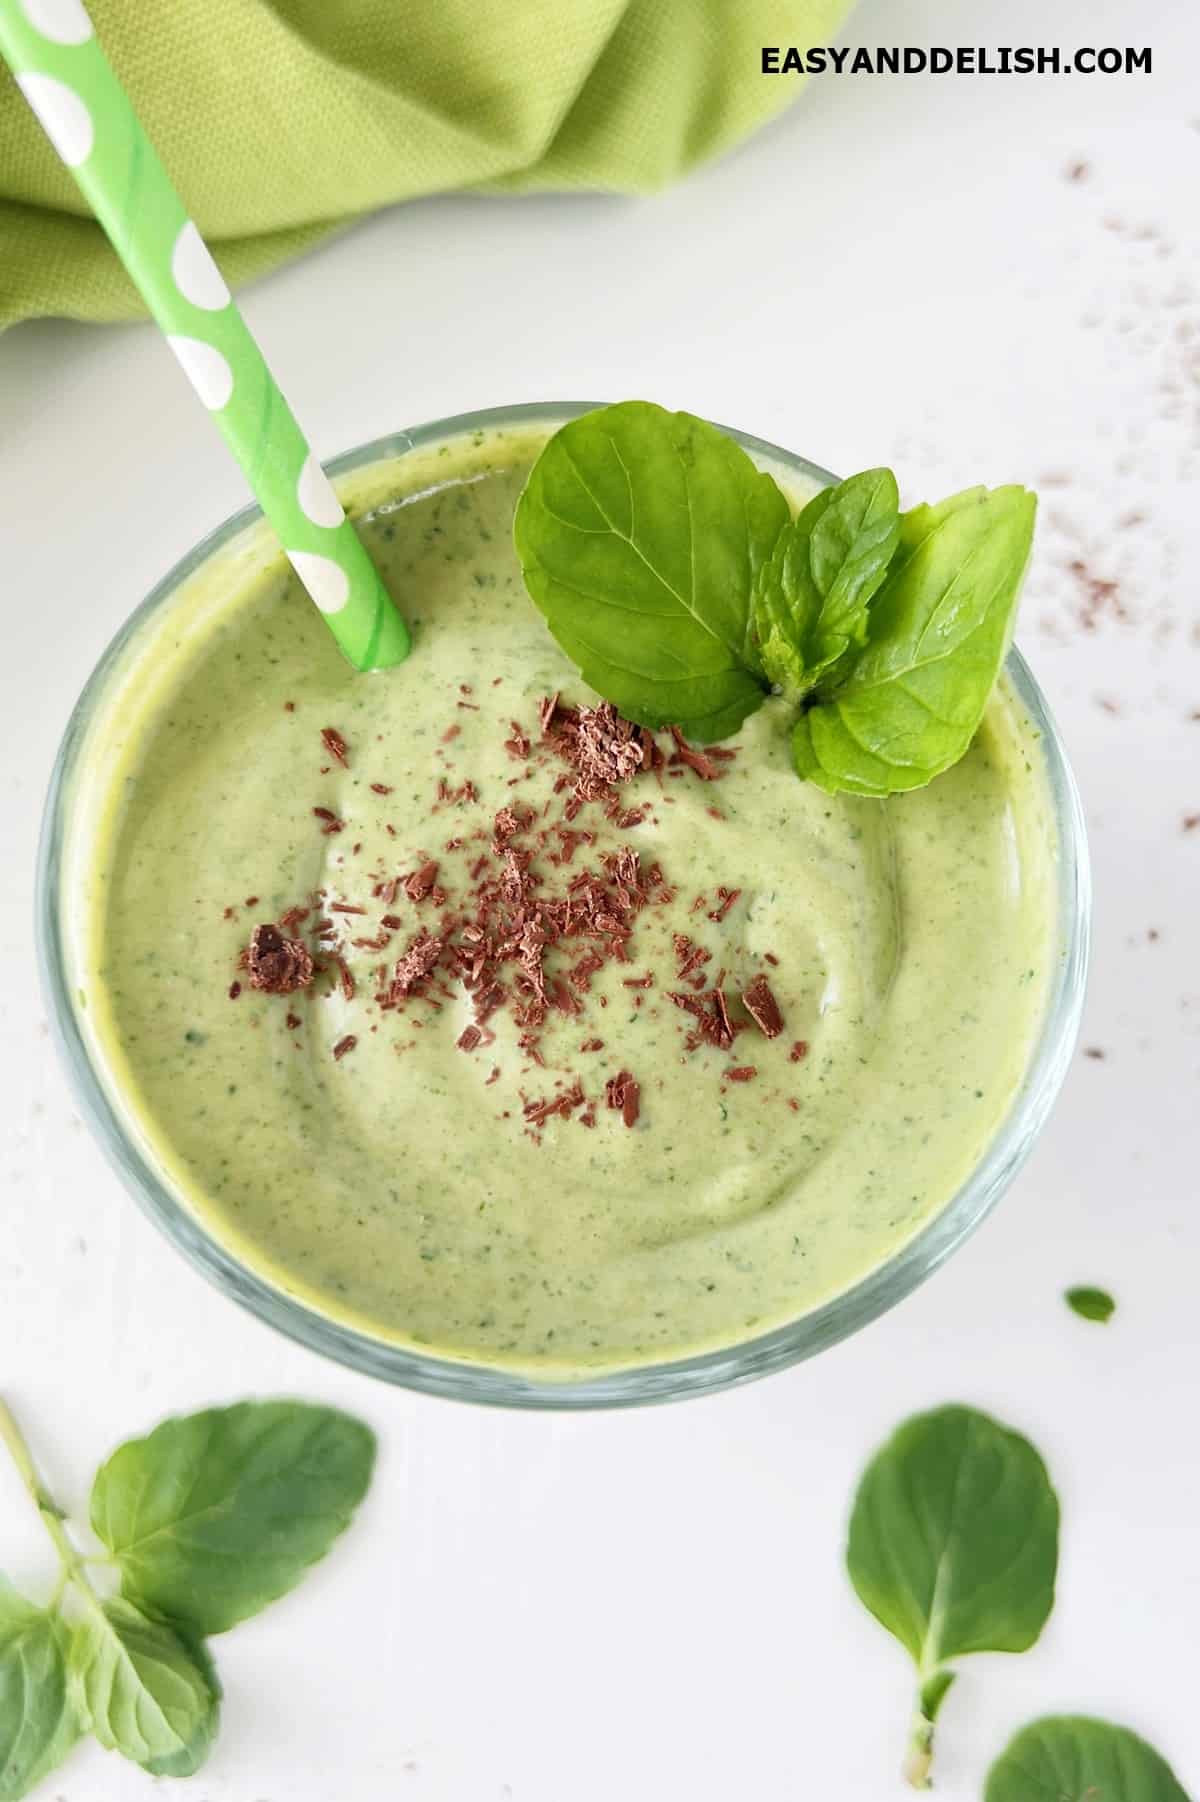 Healthy shamrock protein shake with chocolate shavings and fresh mint leaves. 